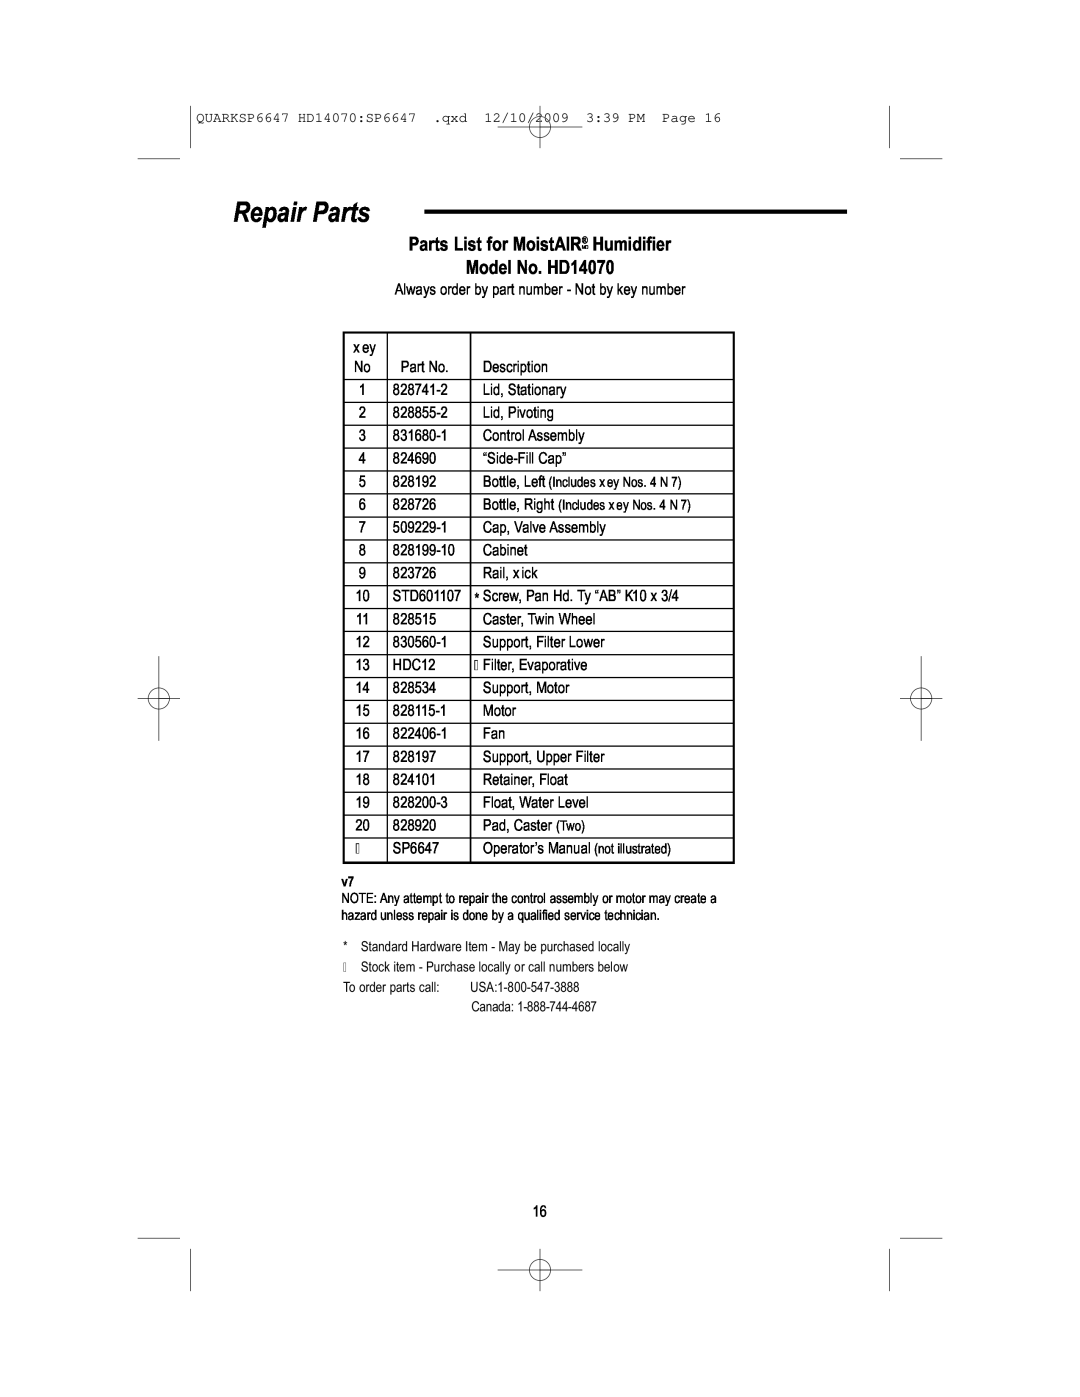 MoistAir owner manual Repair Parts, Parts List for MoistAIRMD Humidifier, Model No. HD14070 